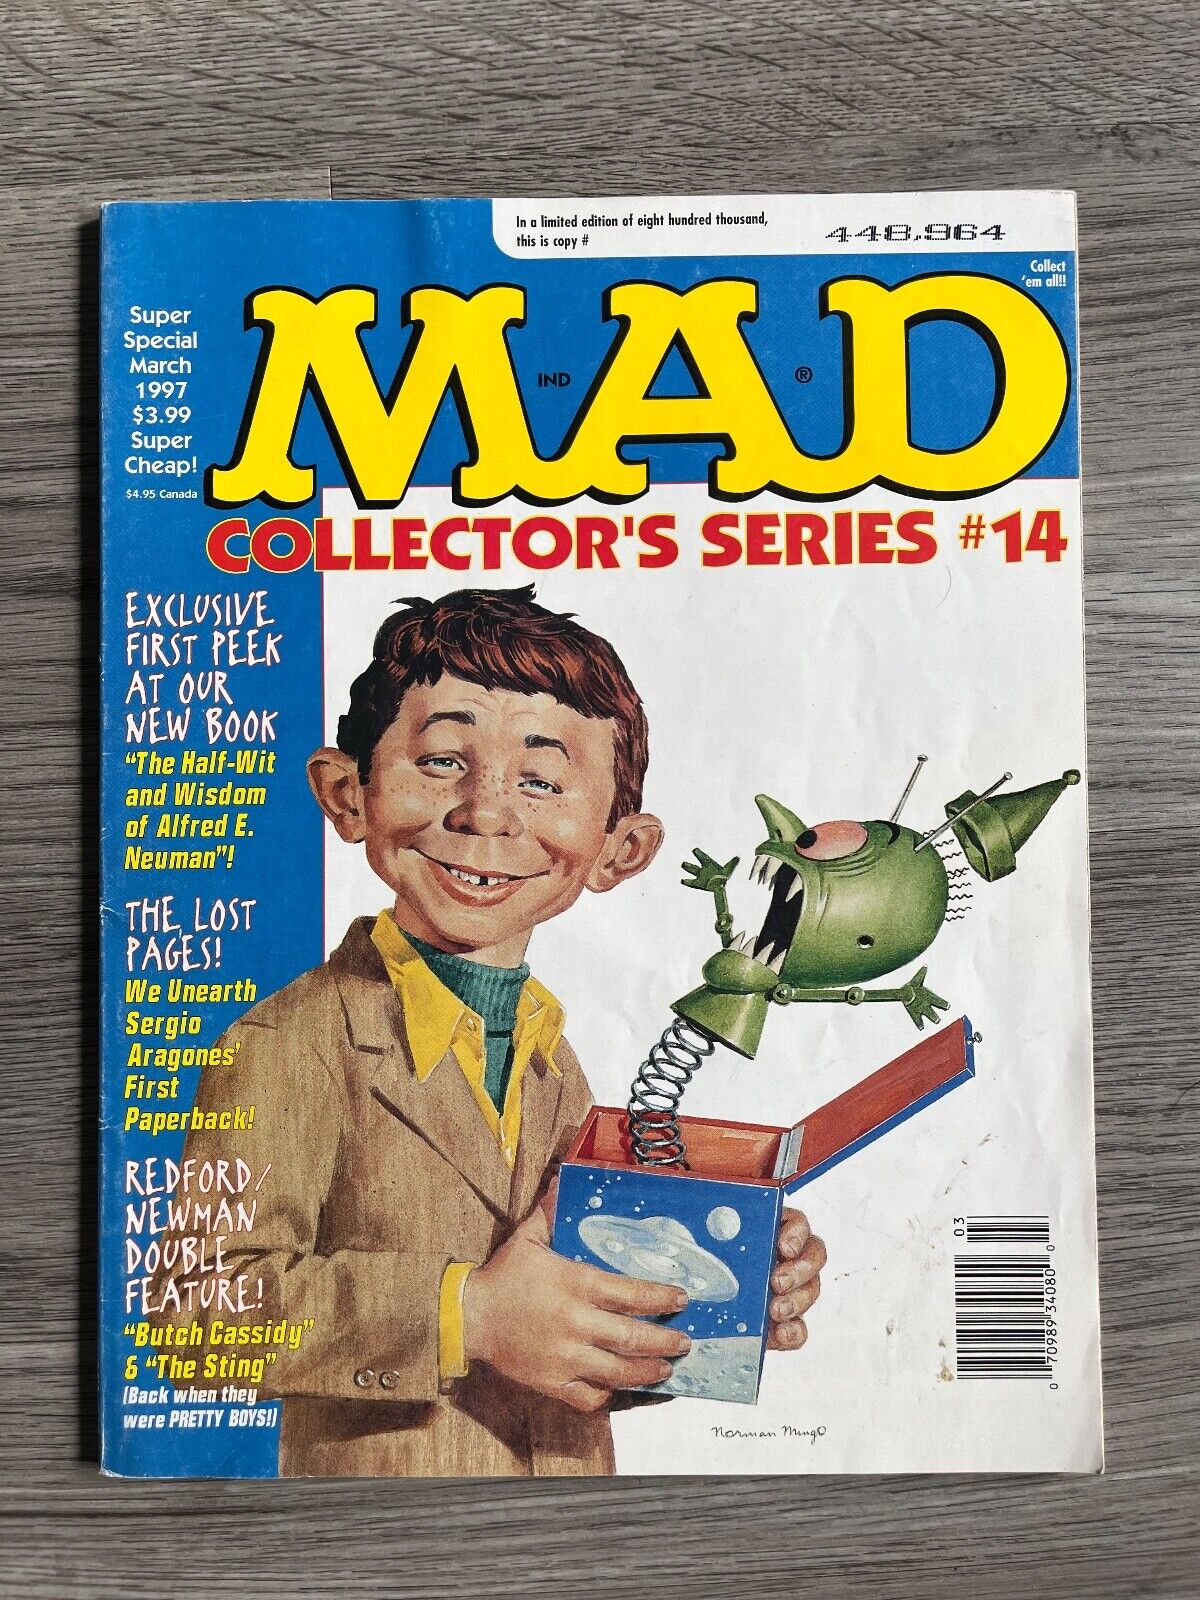 1997 MAD COLLECTOR'S SERIES #14 (VERY GOOD++)